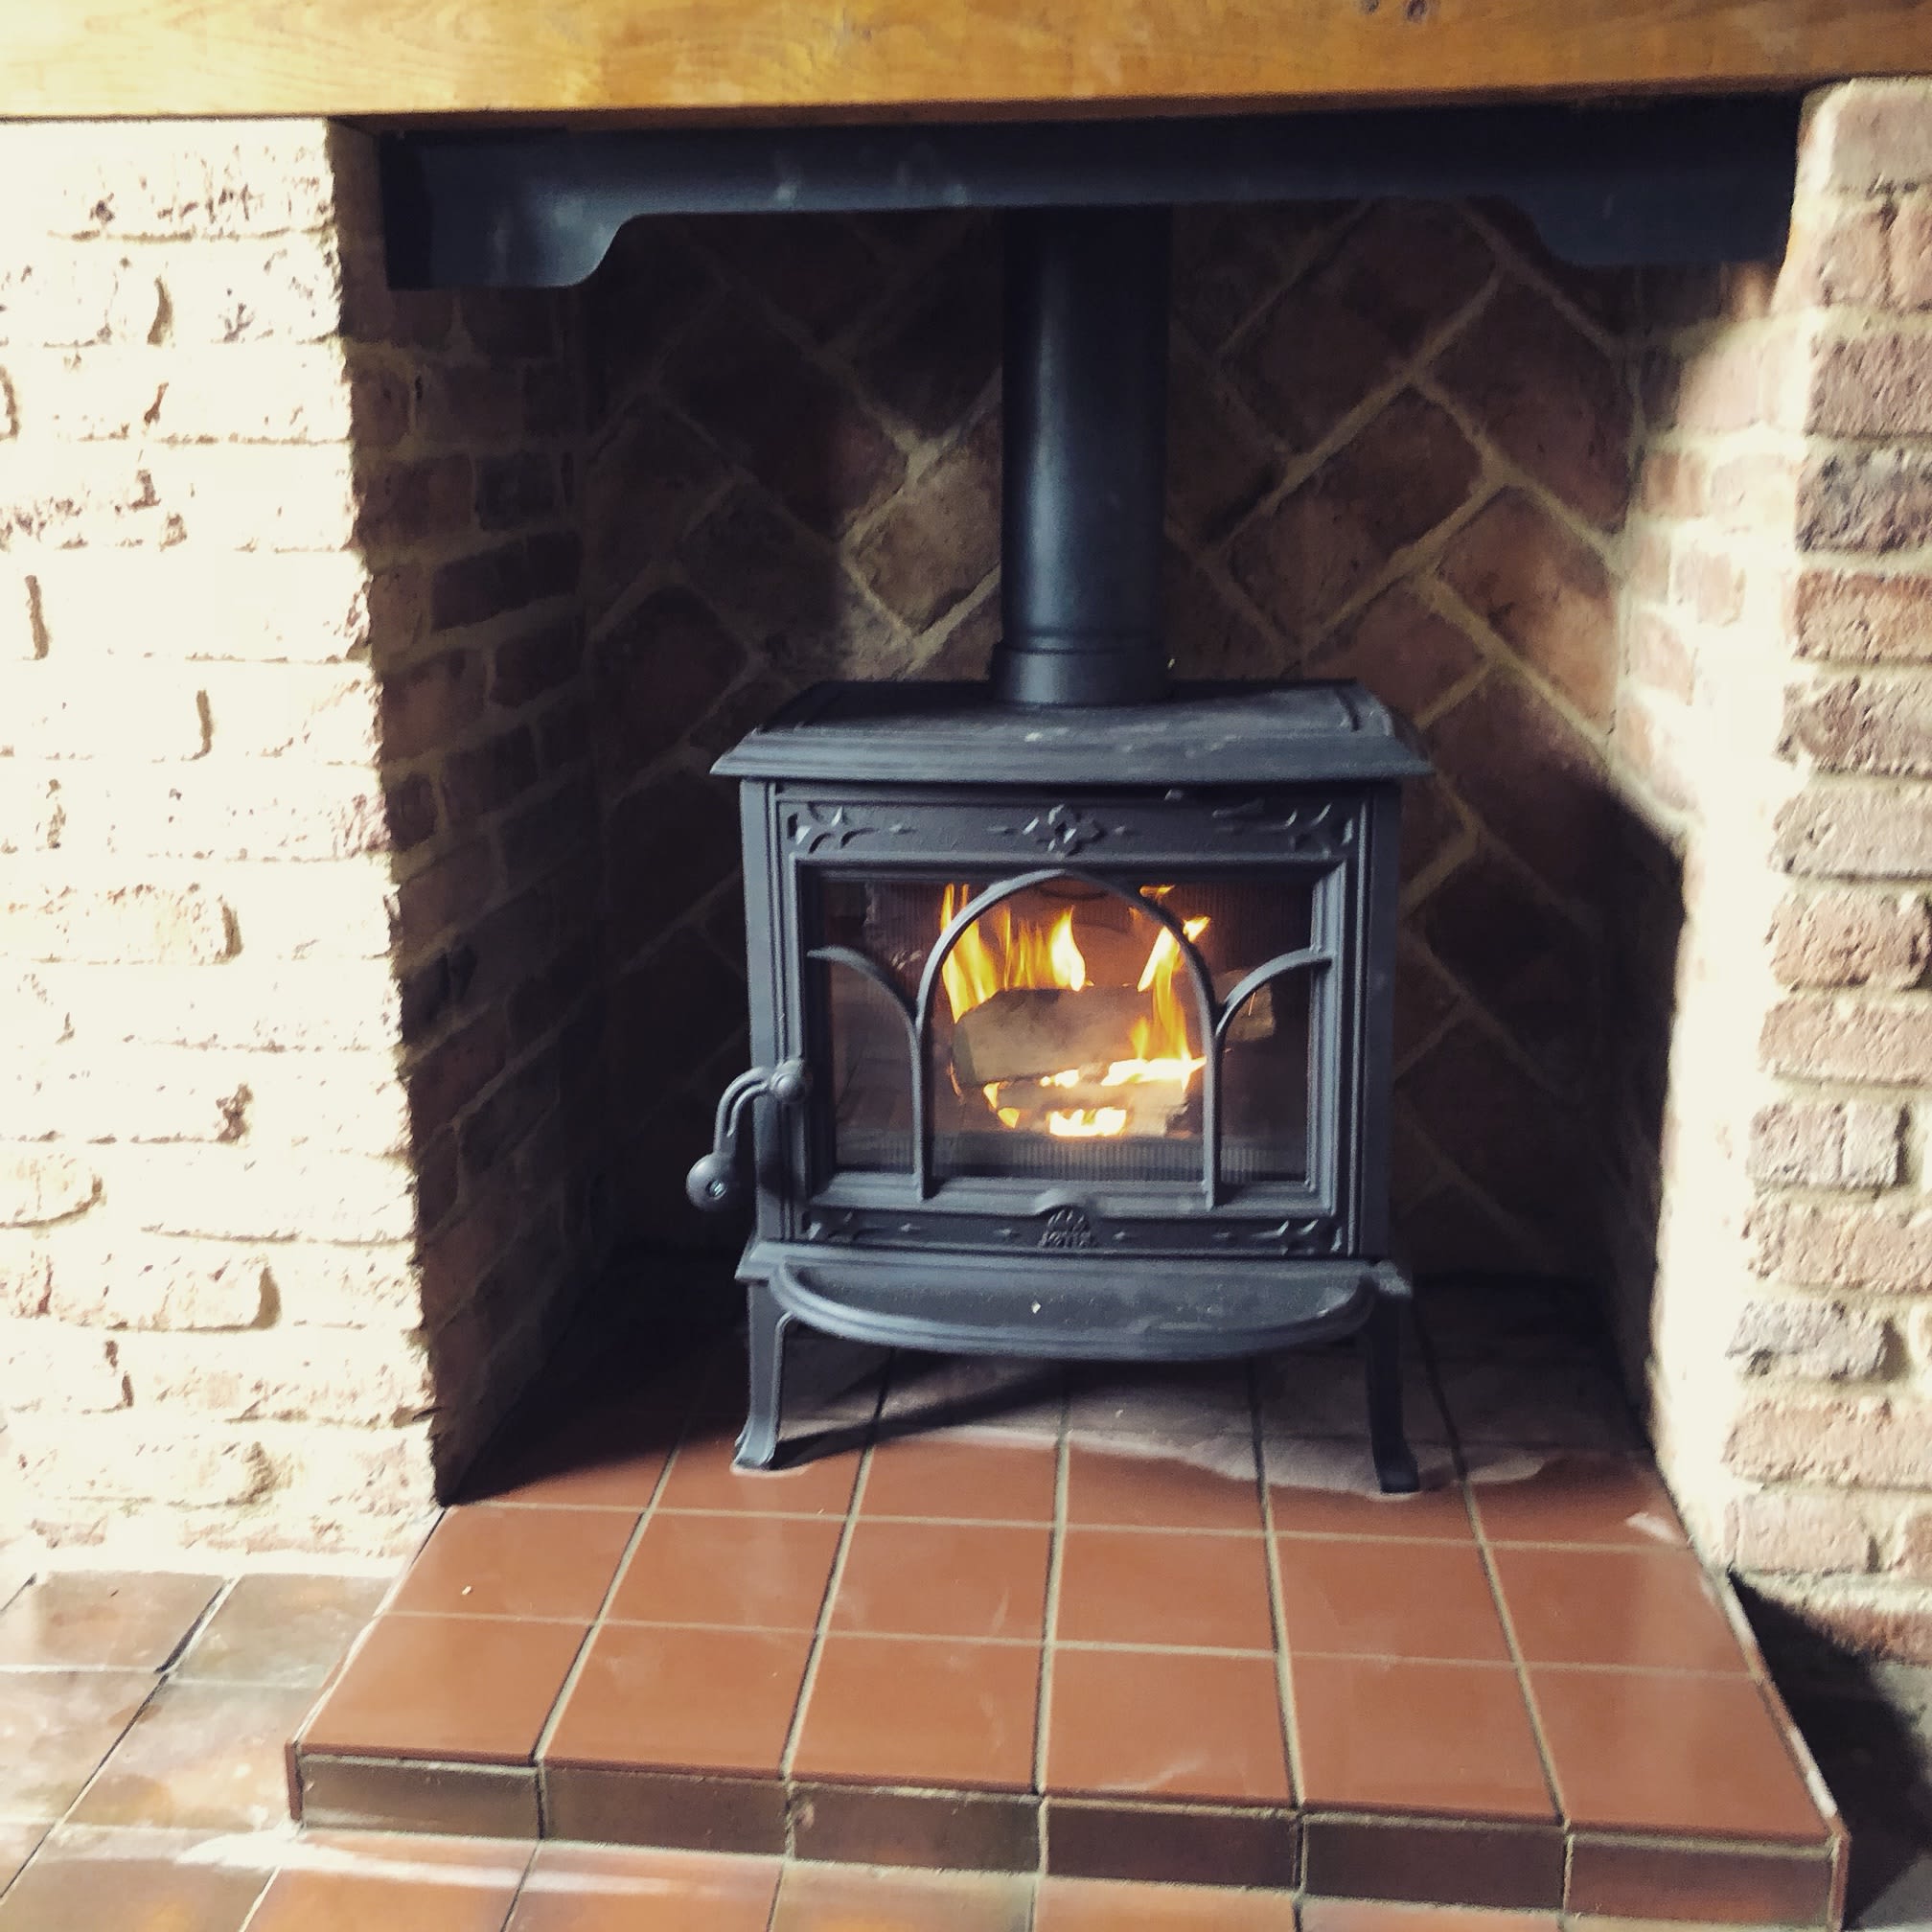 Images RDR Stoves & Installations